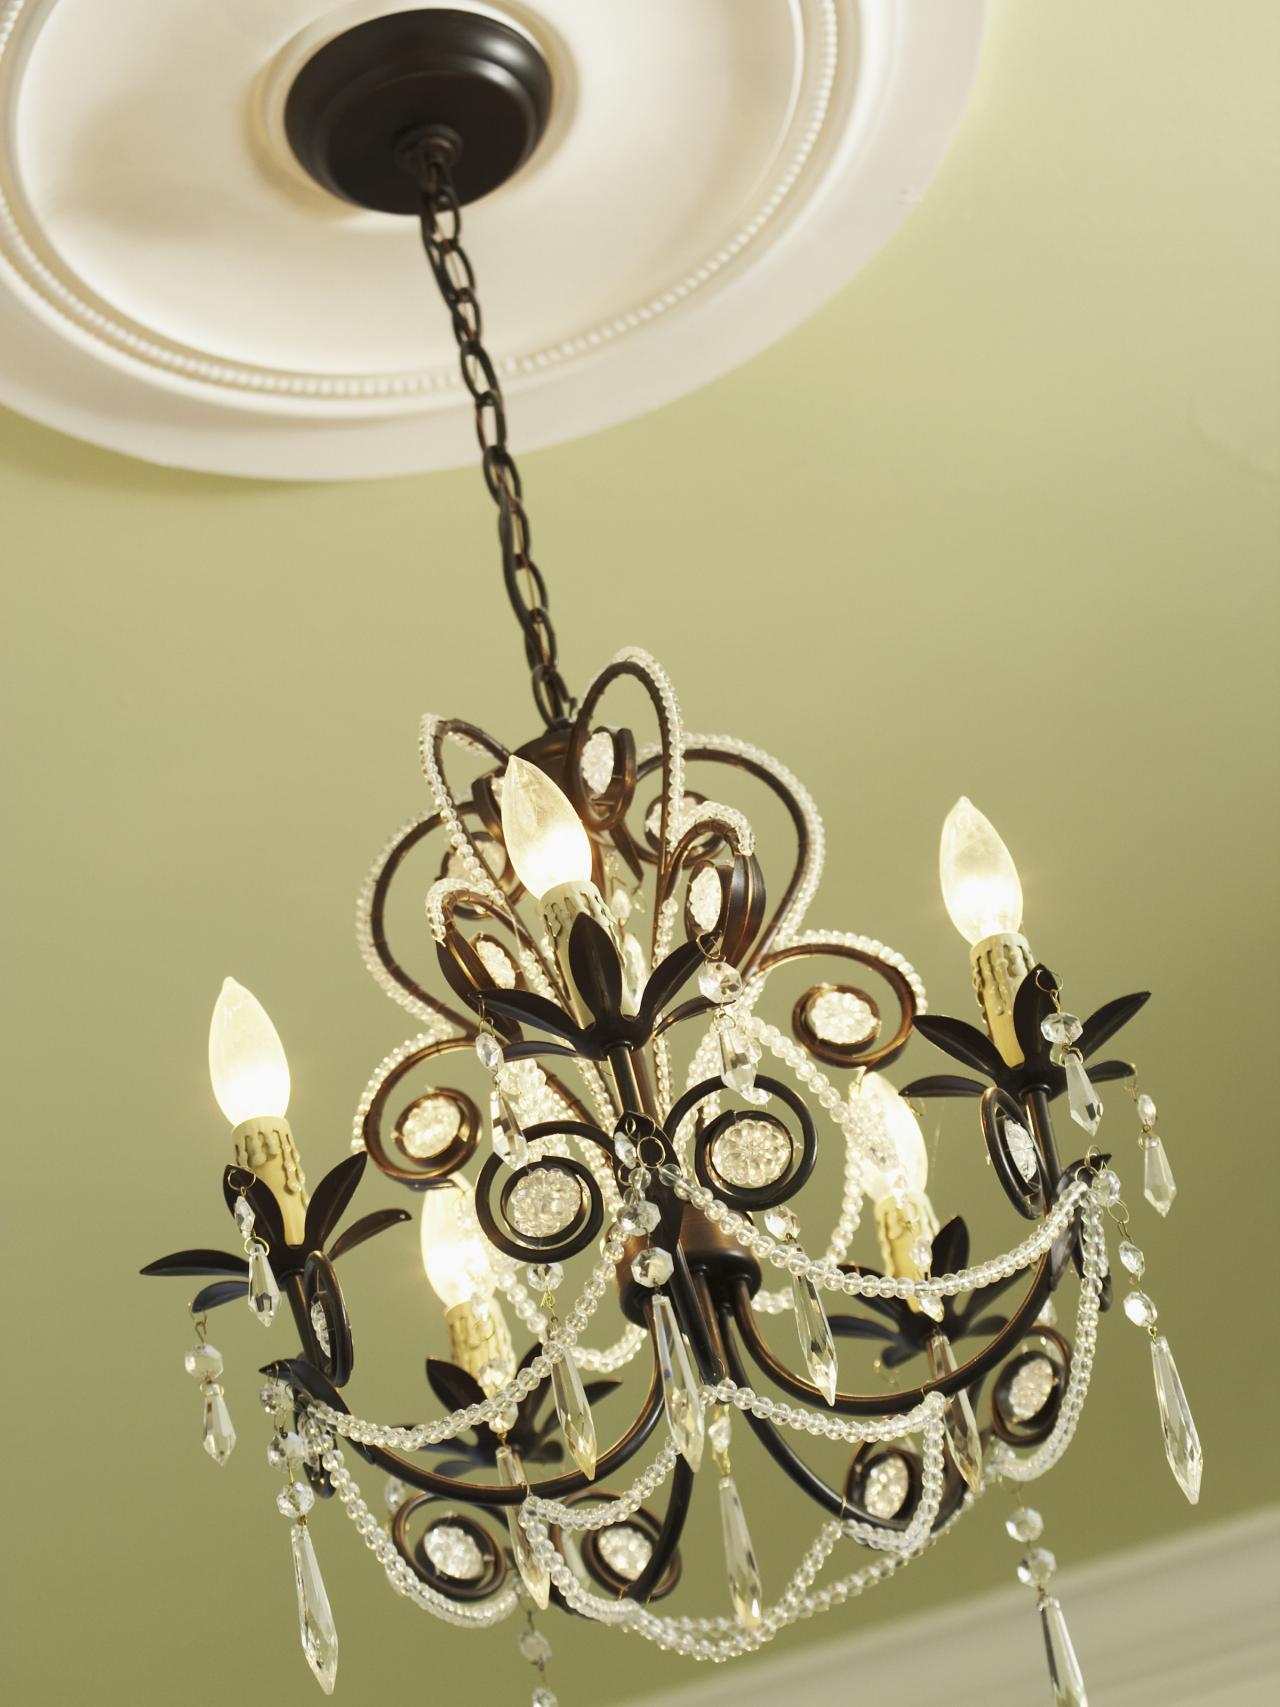 Decorative Ceiling Medallion, How To Hang A Chandelier Light Fixture